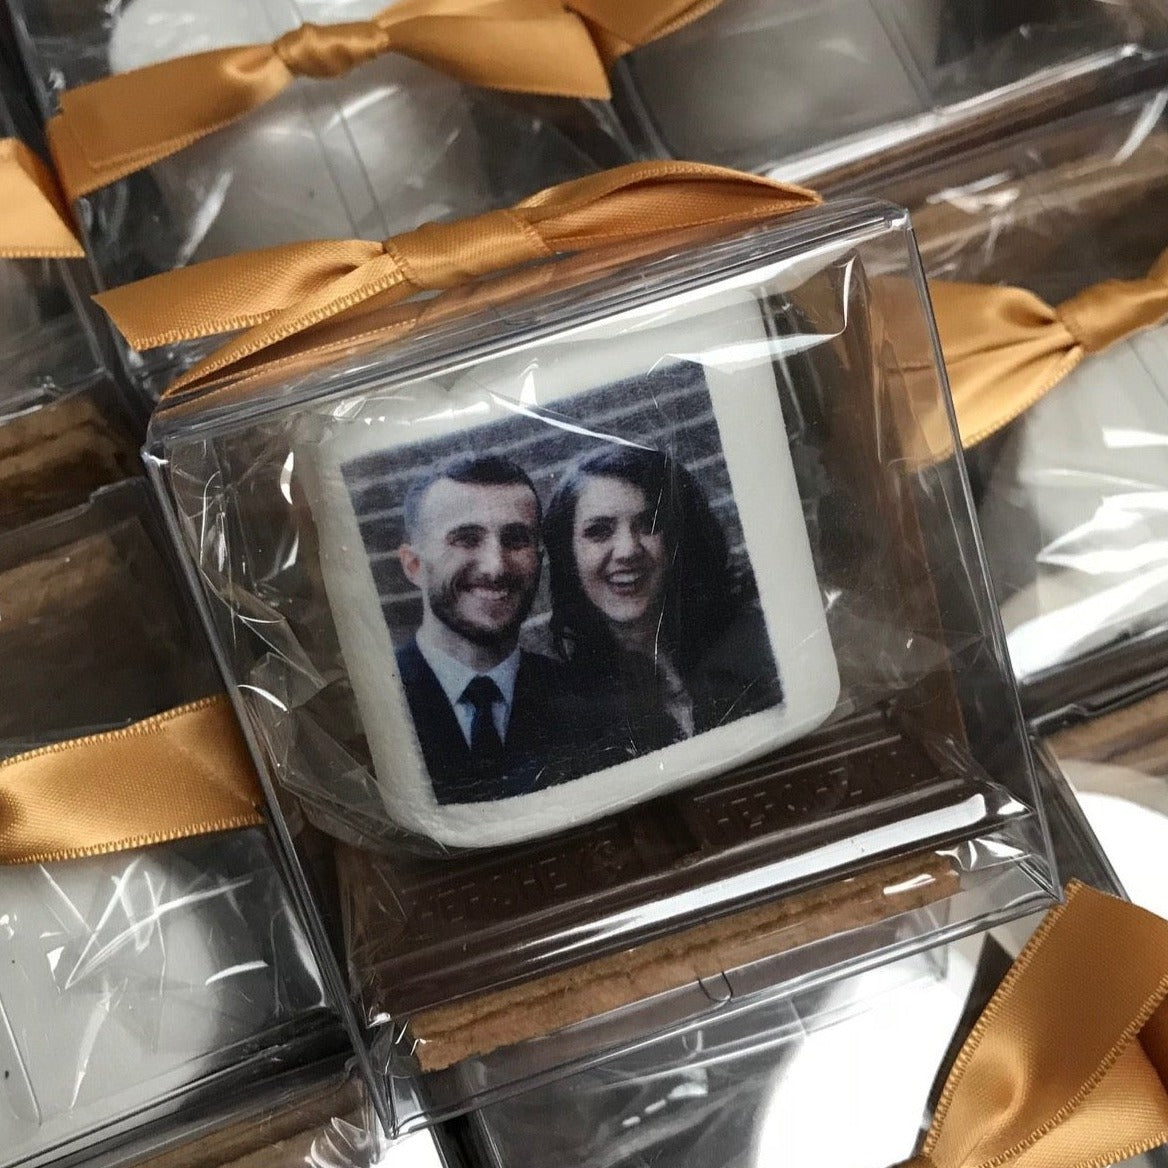 Smore kit wedding favor with couples photograph printed on the marshmallow